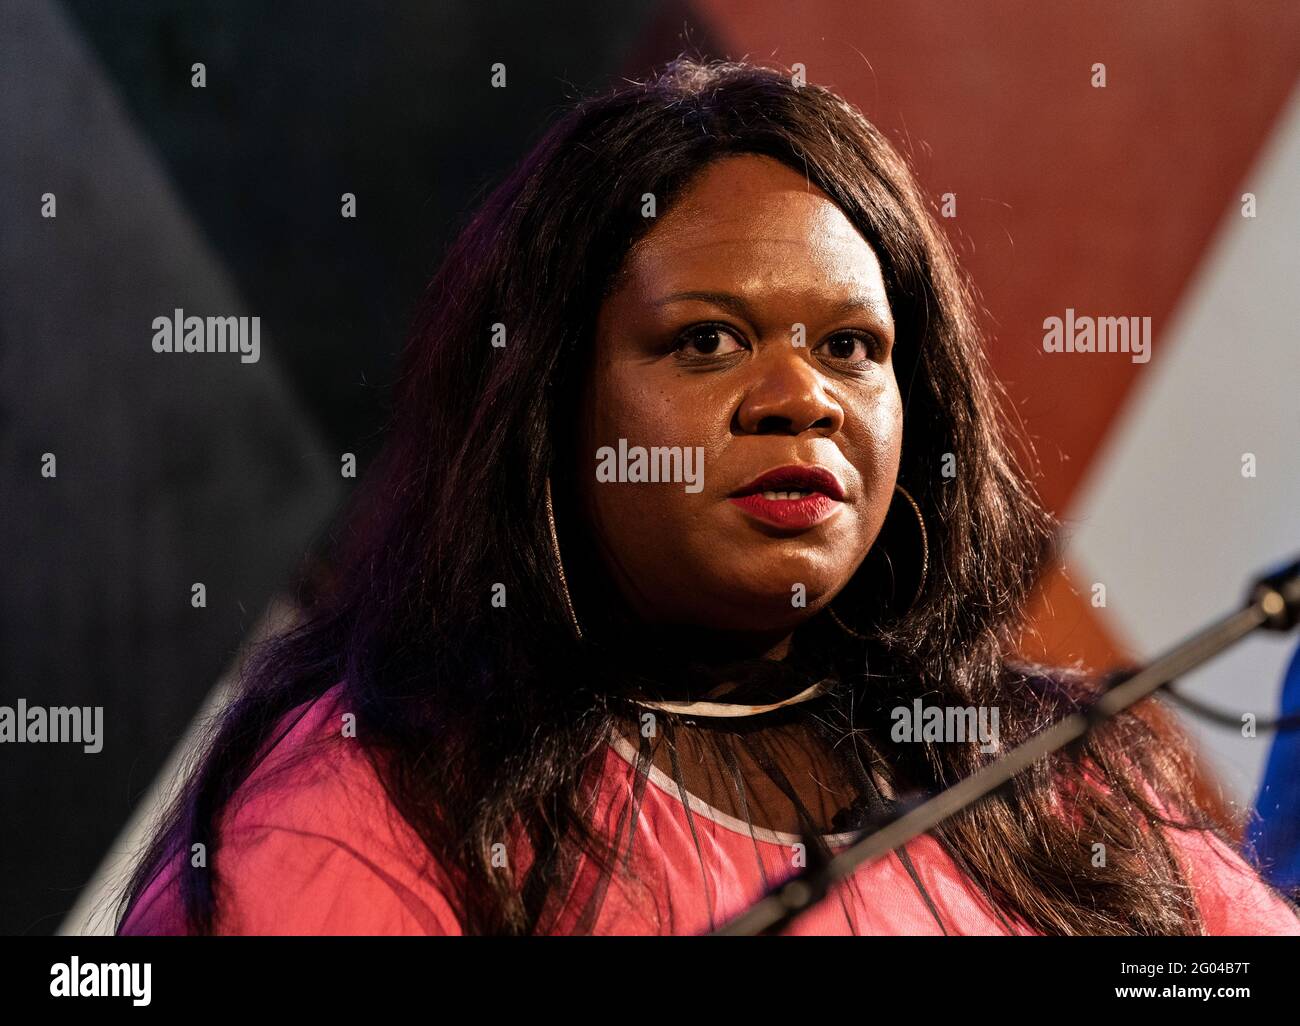 New York, NY - May 31, 2021: Comedian Yamaneika Saunders speaks at Carolines on Broadway comedy club re-opening after pandemic ceremony Stock Photo